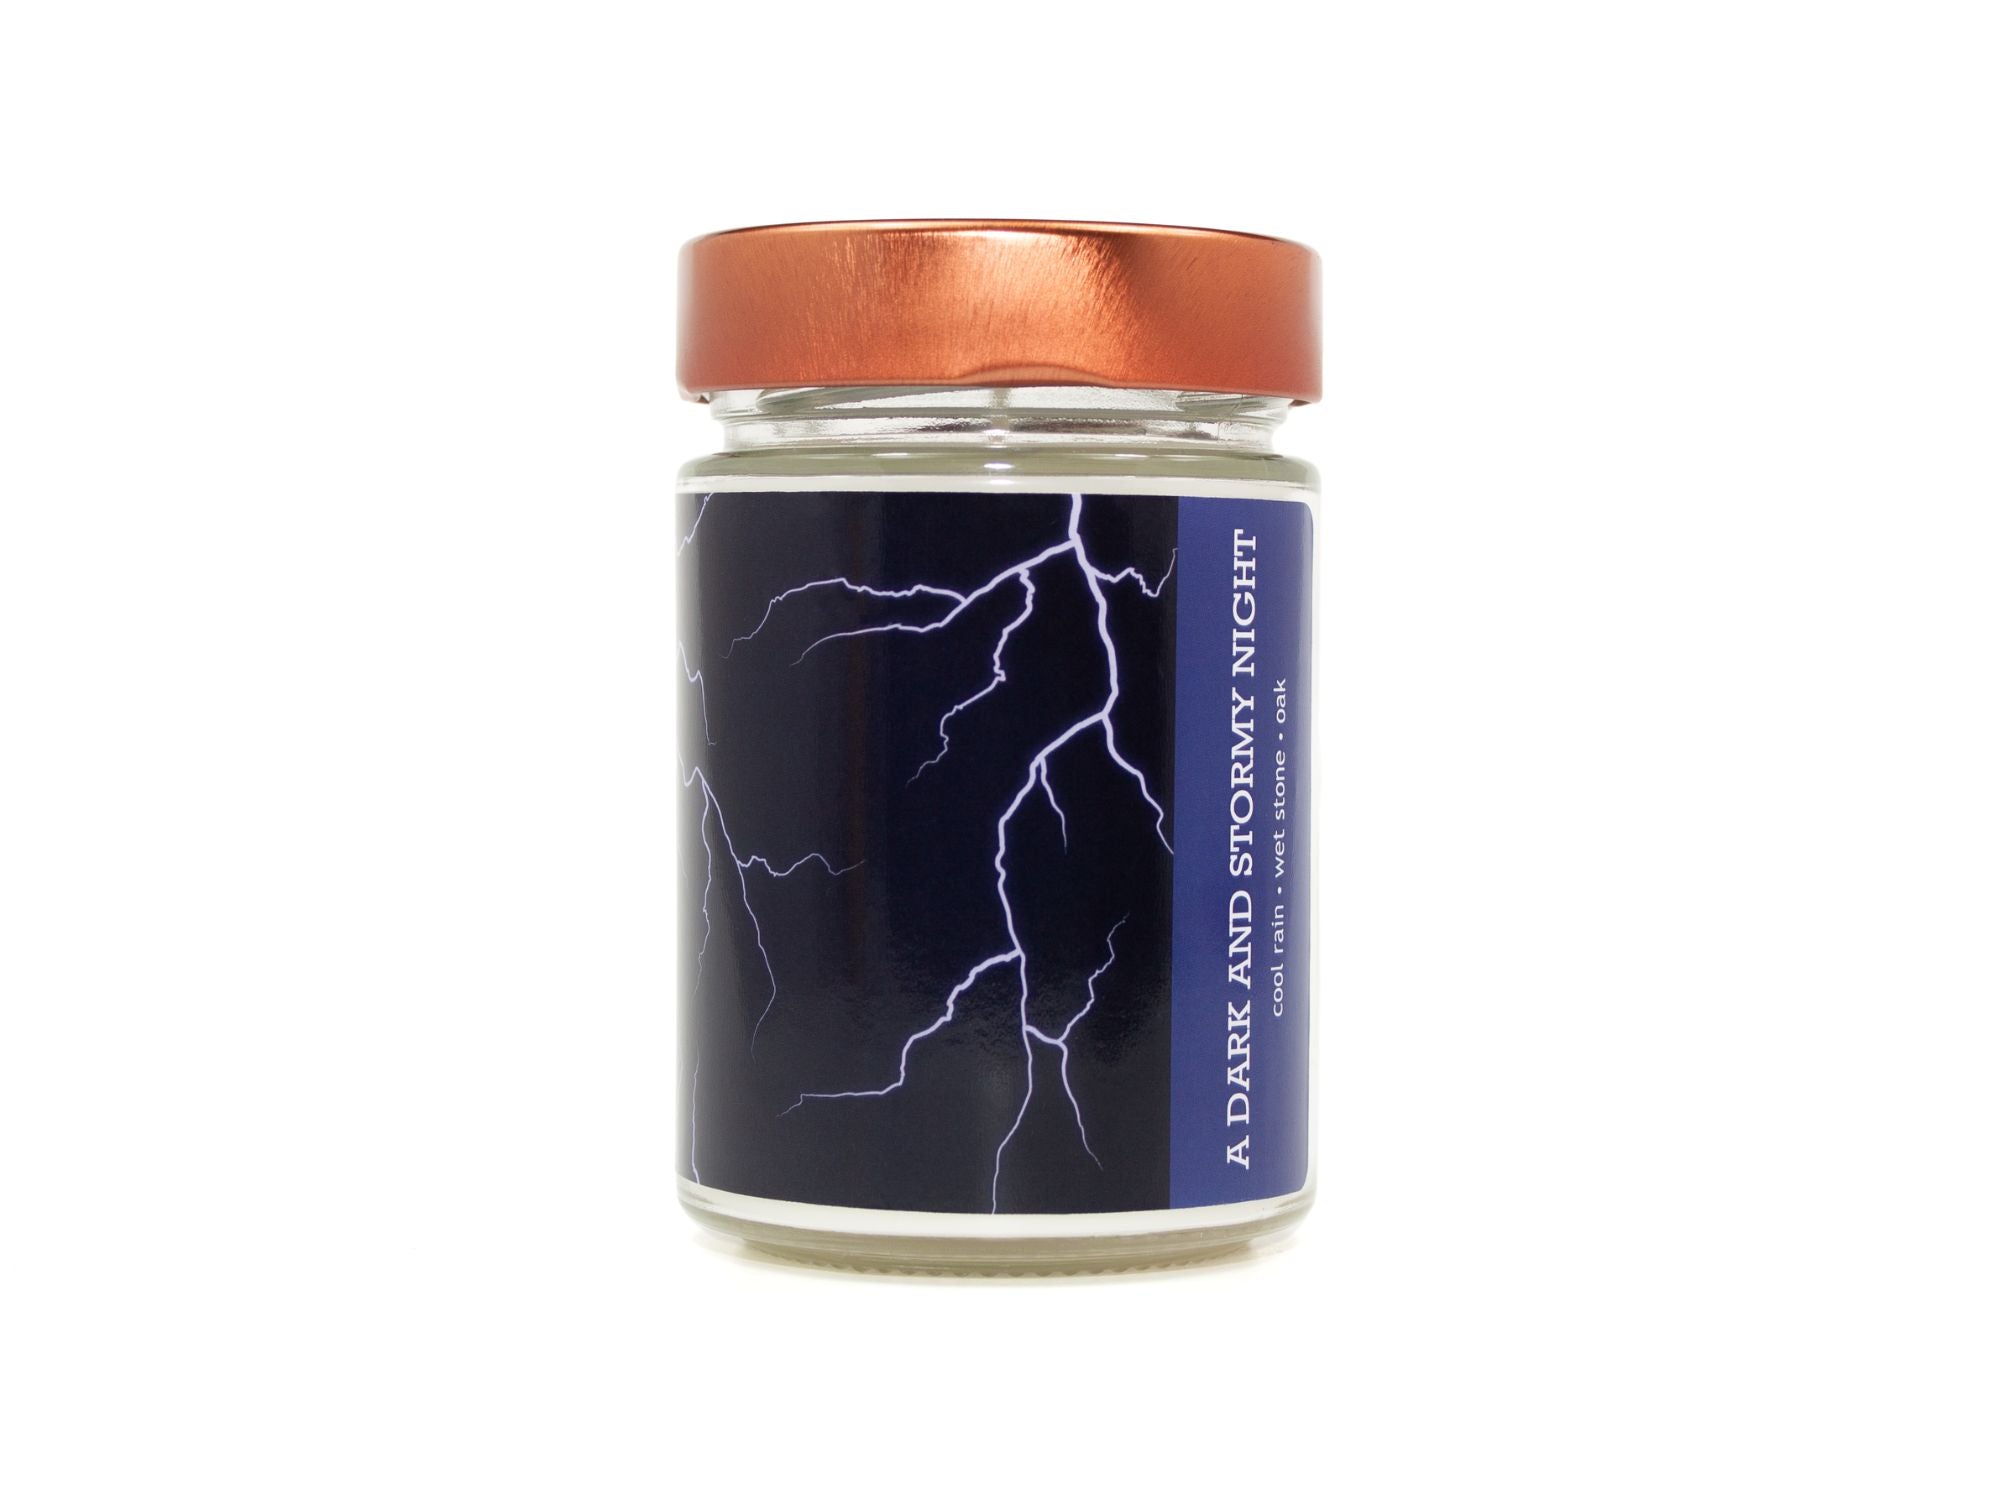 Onset & Rime rain scented candle called 